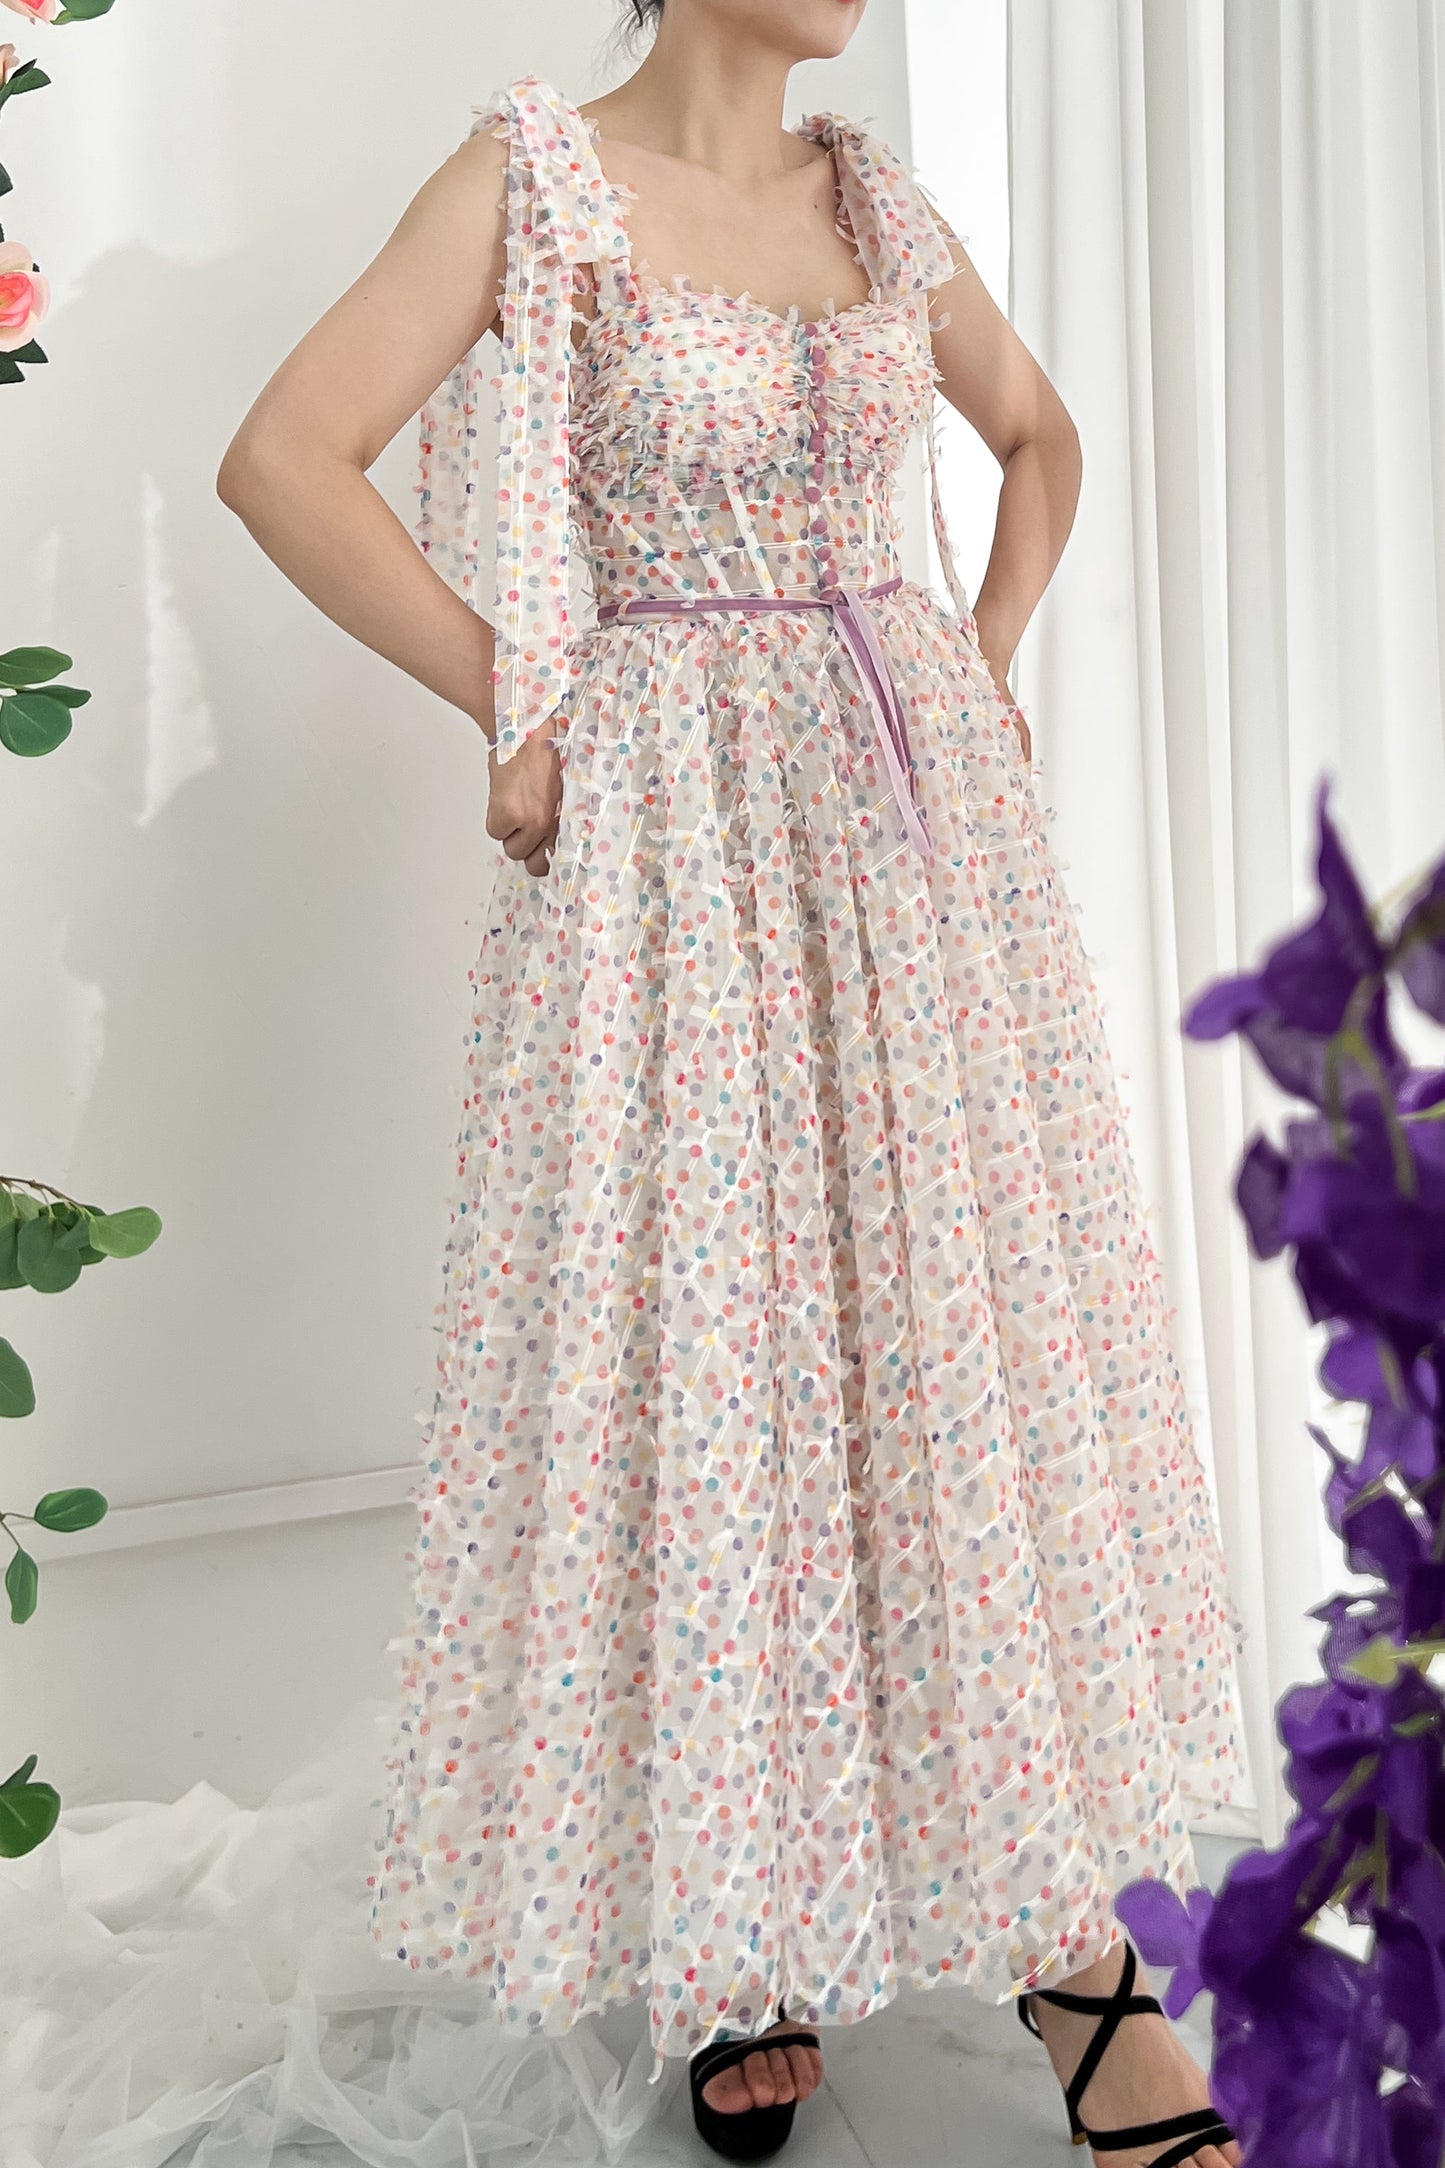 Retro Colorful Polka Dots Dress with Removable Puff Sleeves, Tie Straps